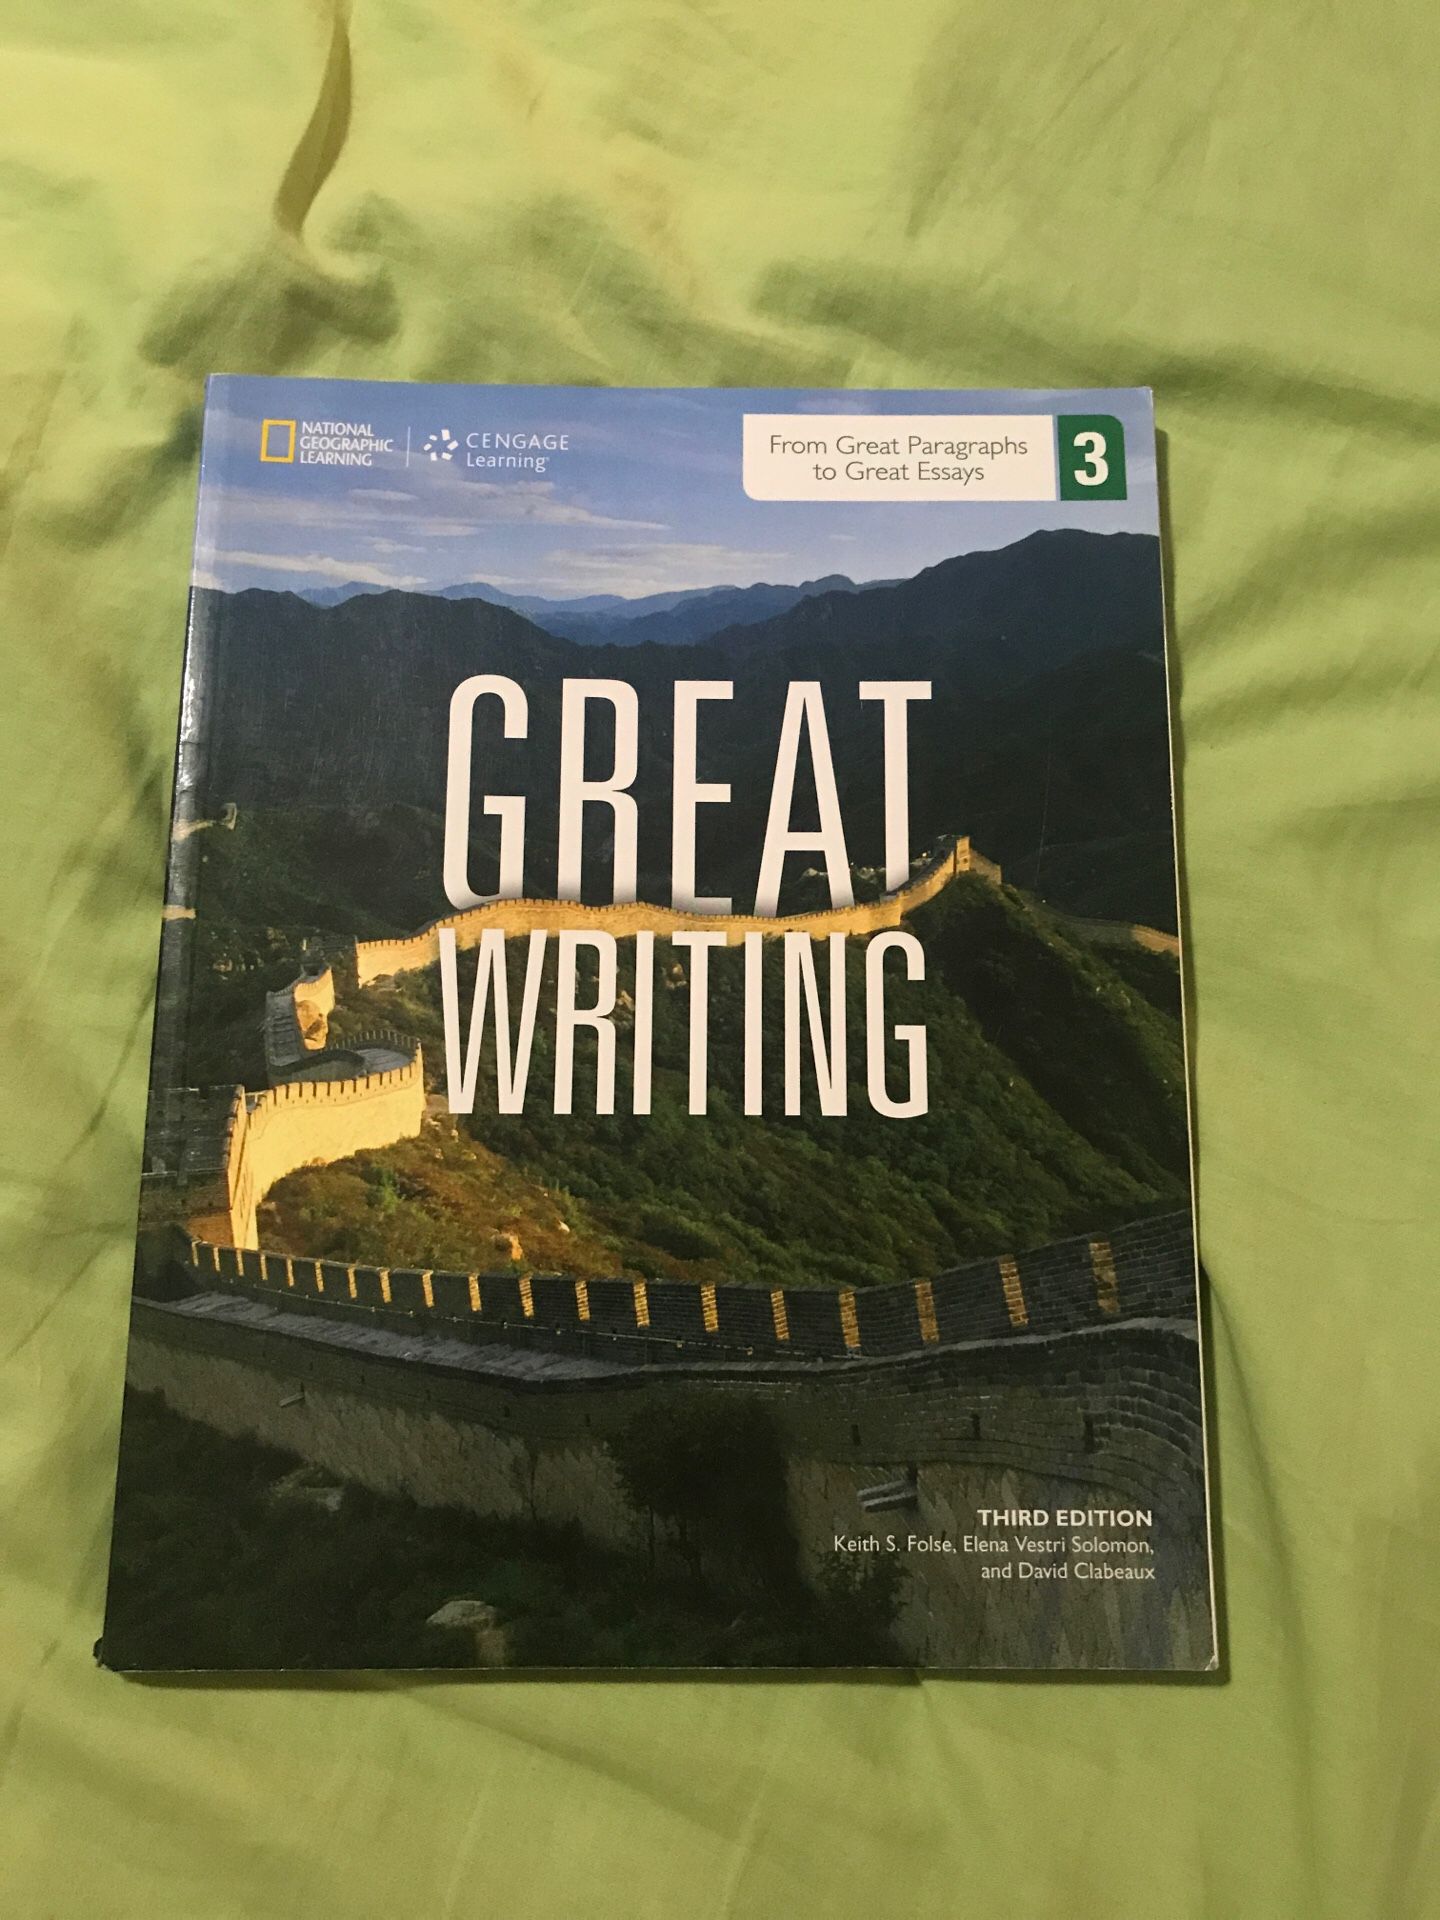 for　(From　Great　in　Writing　Glendale,　Great　to　Paragraphs　Great　Essays)　Sale　CA　OfferUp